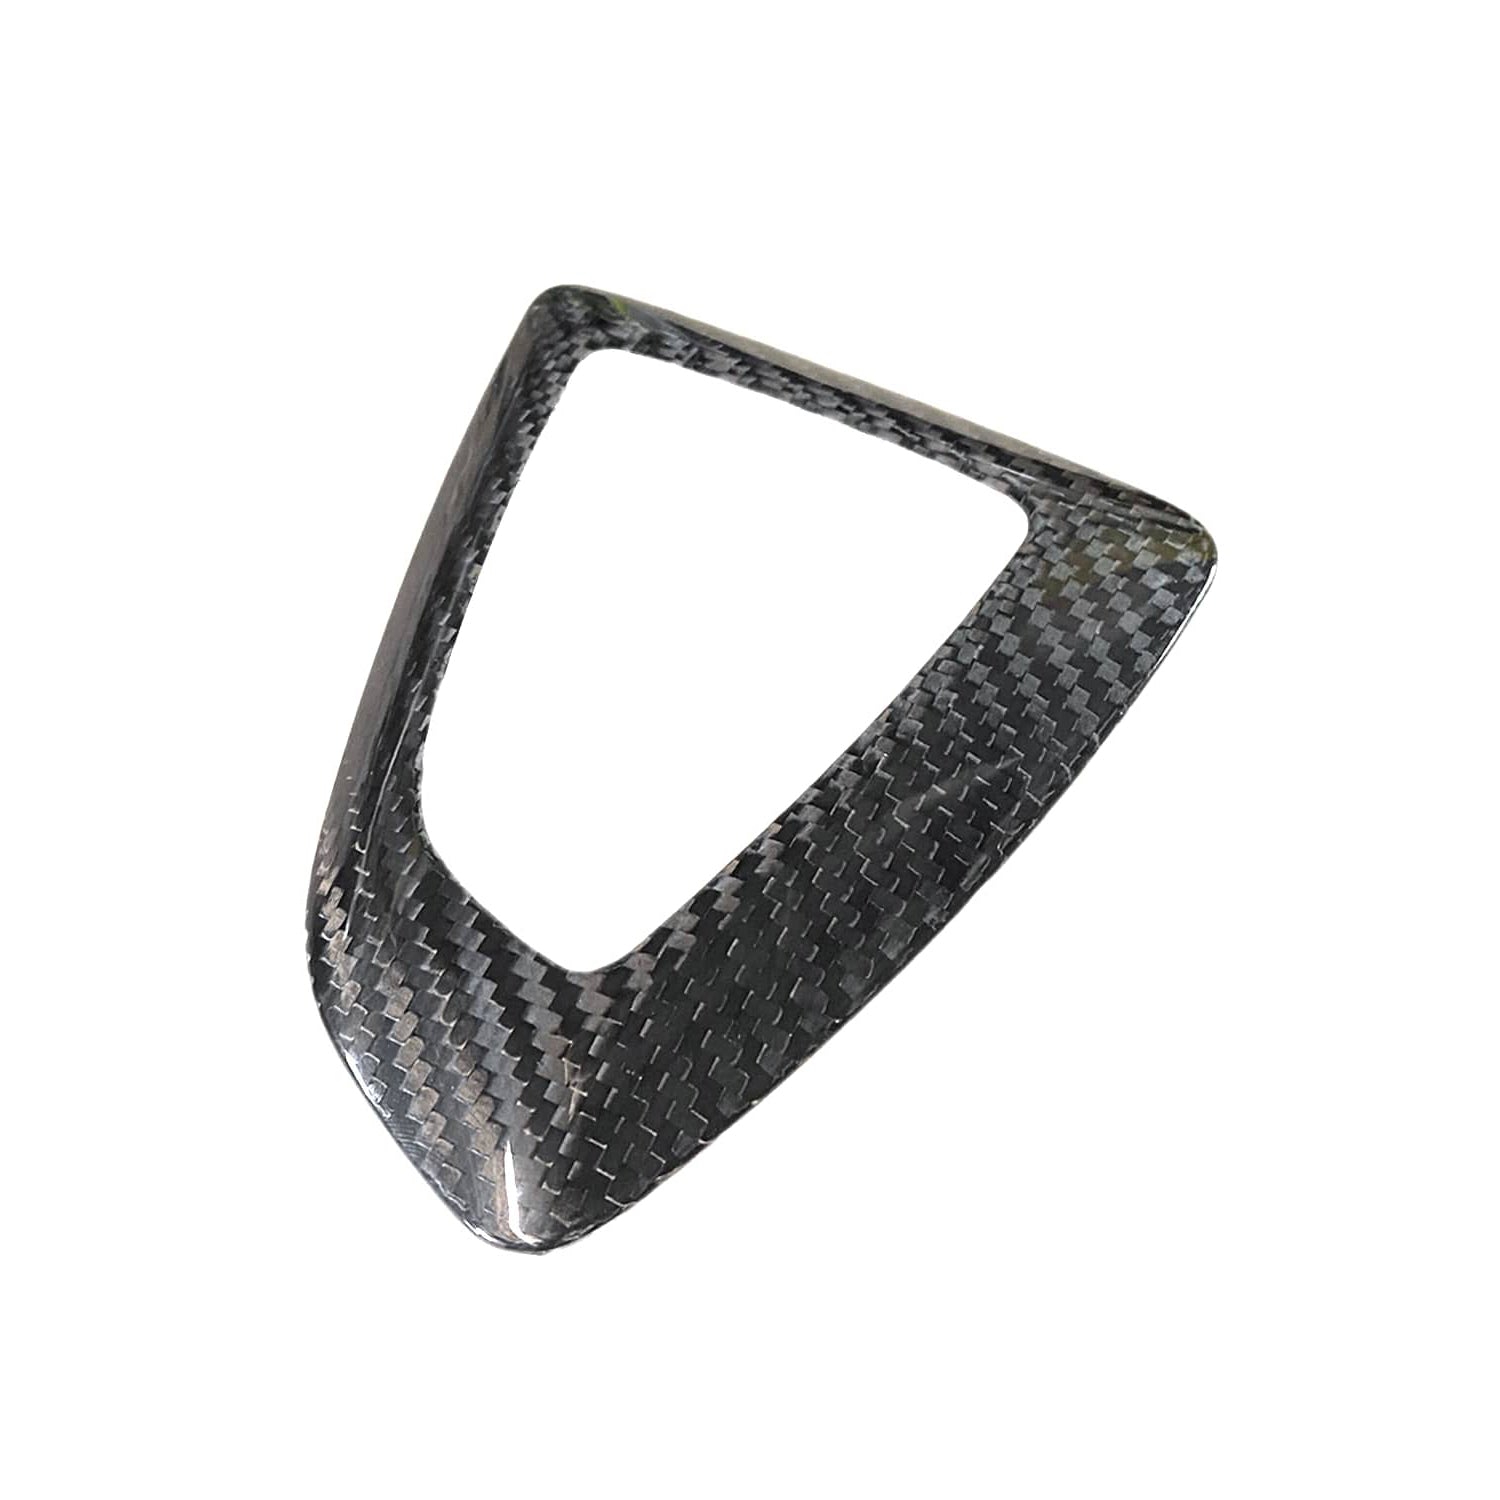 SHFT BMW ZF8 Gearbox Base Trim Cover LHD In Gloss Carbon Fibre (M135i/M140i/M235i/M240i)-R44 Performance